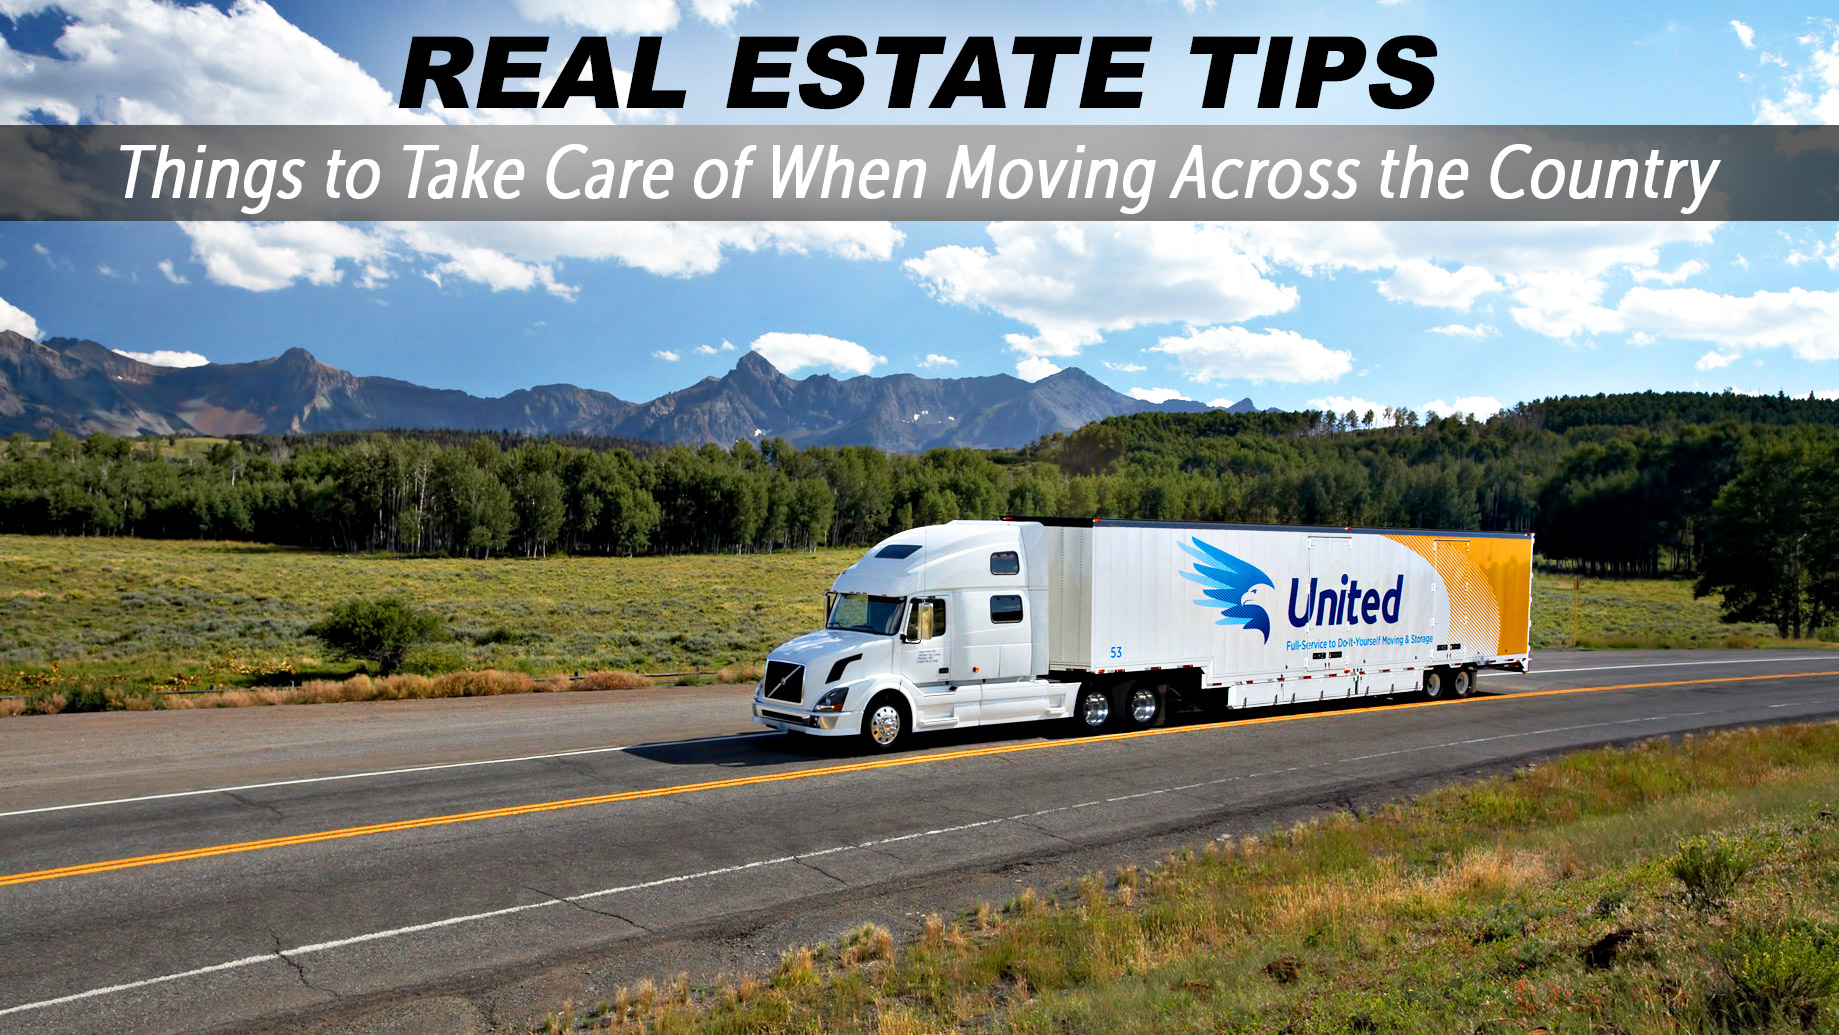 Real Estate Tips - Things to Take Care of When Moving Across the Country